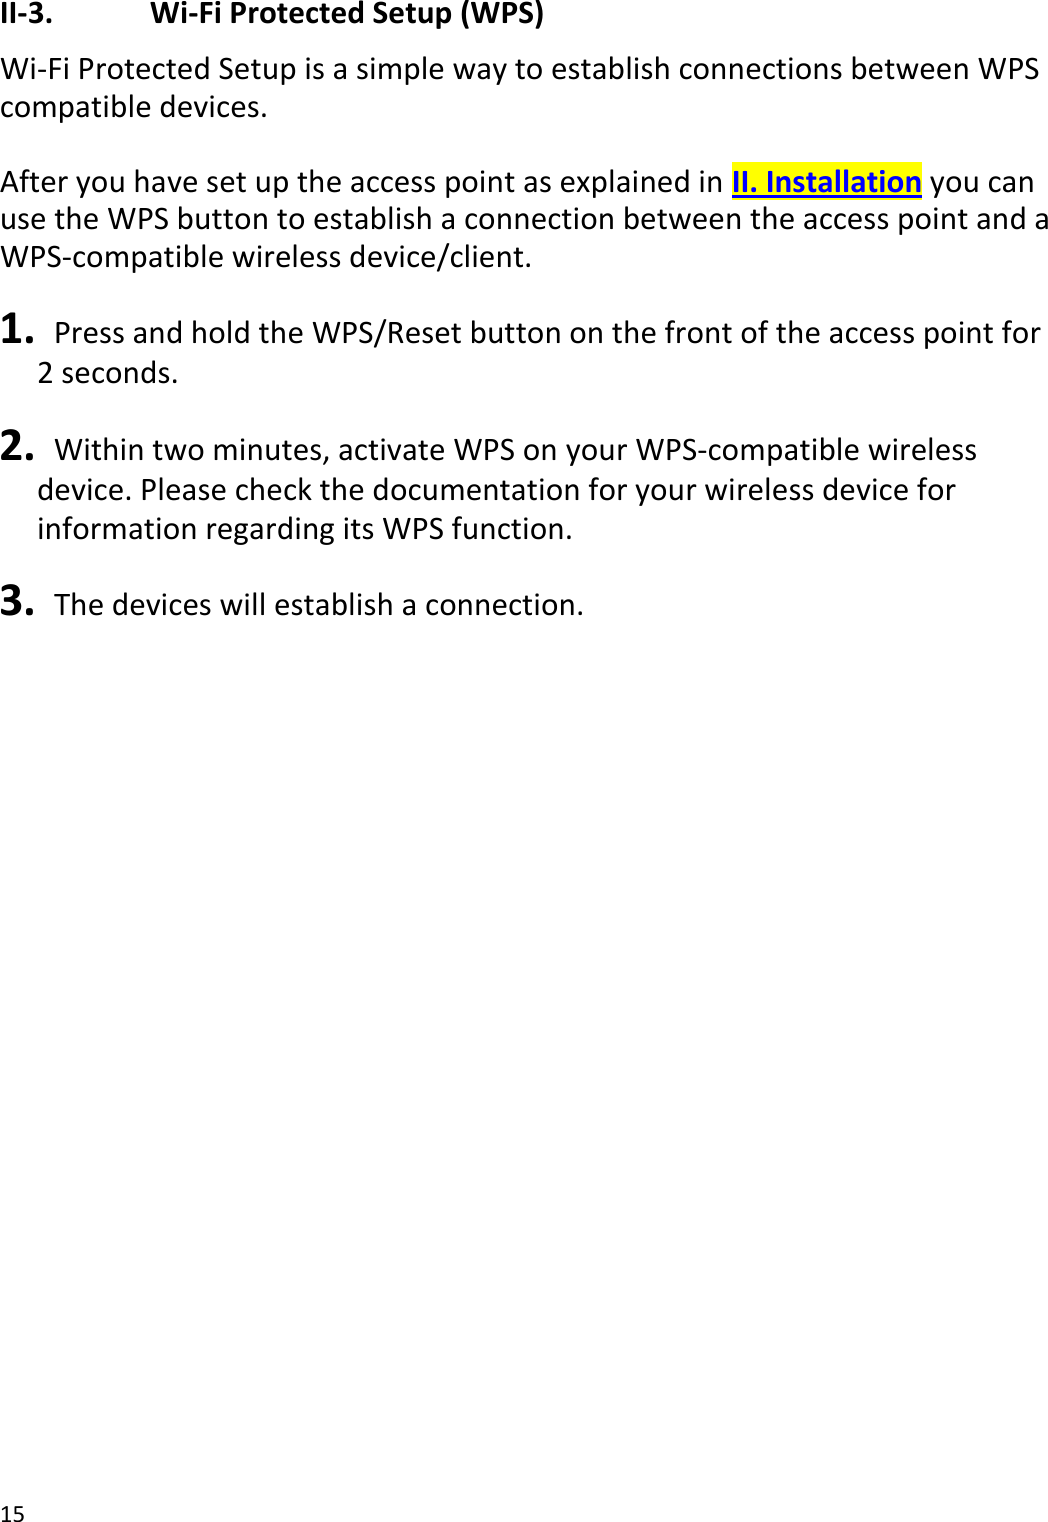 15  II-3.    Wi-Fi Protected Setup (WPS) Wi-Fi Protected Setup is a simple way to establish connections between WPS compatible devices.  After you have set up the access point as explained in II. Installation you can use the WPS button to establish a connection between the access point and a WPS-compatible wireless device/client.  1.   Press and hold the WPS/Reset button on the front of the access point for 2 seconds.  2.   Within two minutes, activate WPS on your WPS-compatible wireless device. Please check the documentation for your wireless device for information regarding its WPS function.  3.   The devices will establish a connection.    